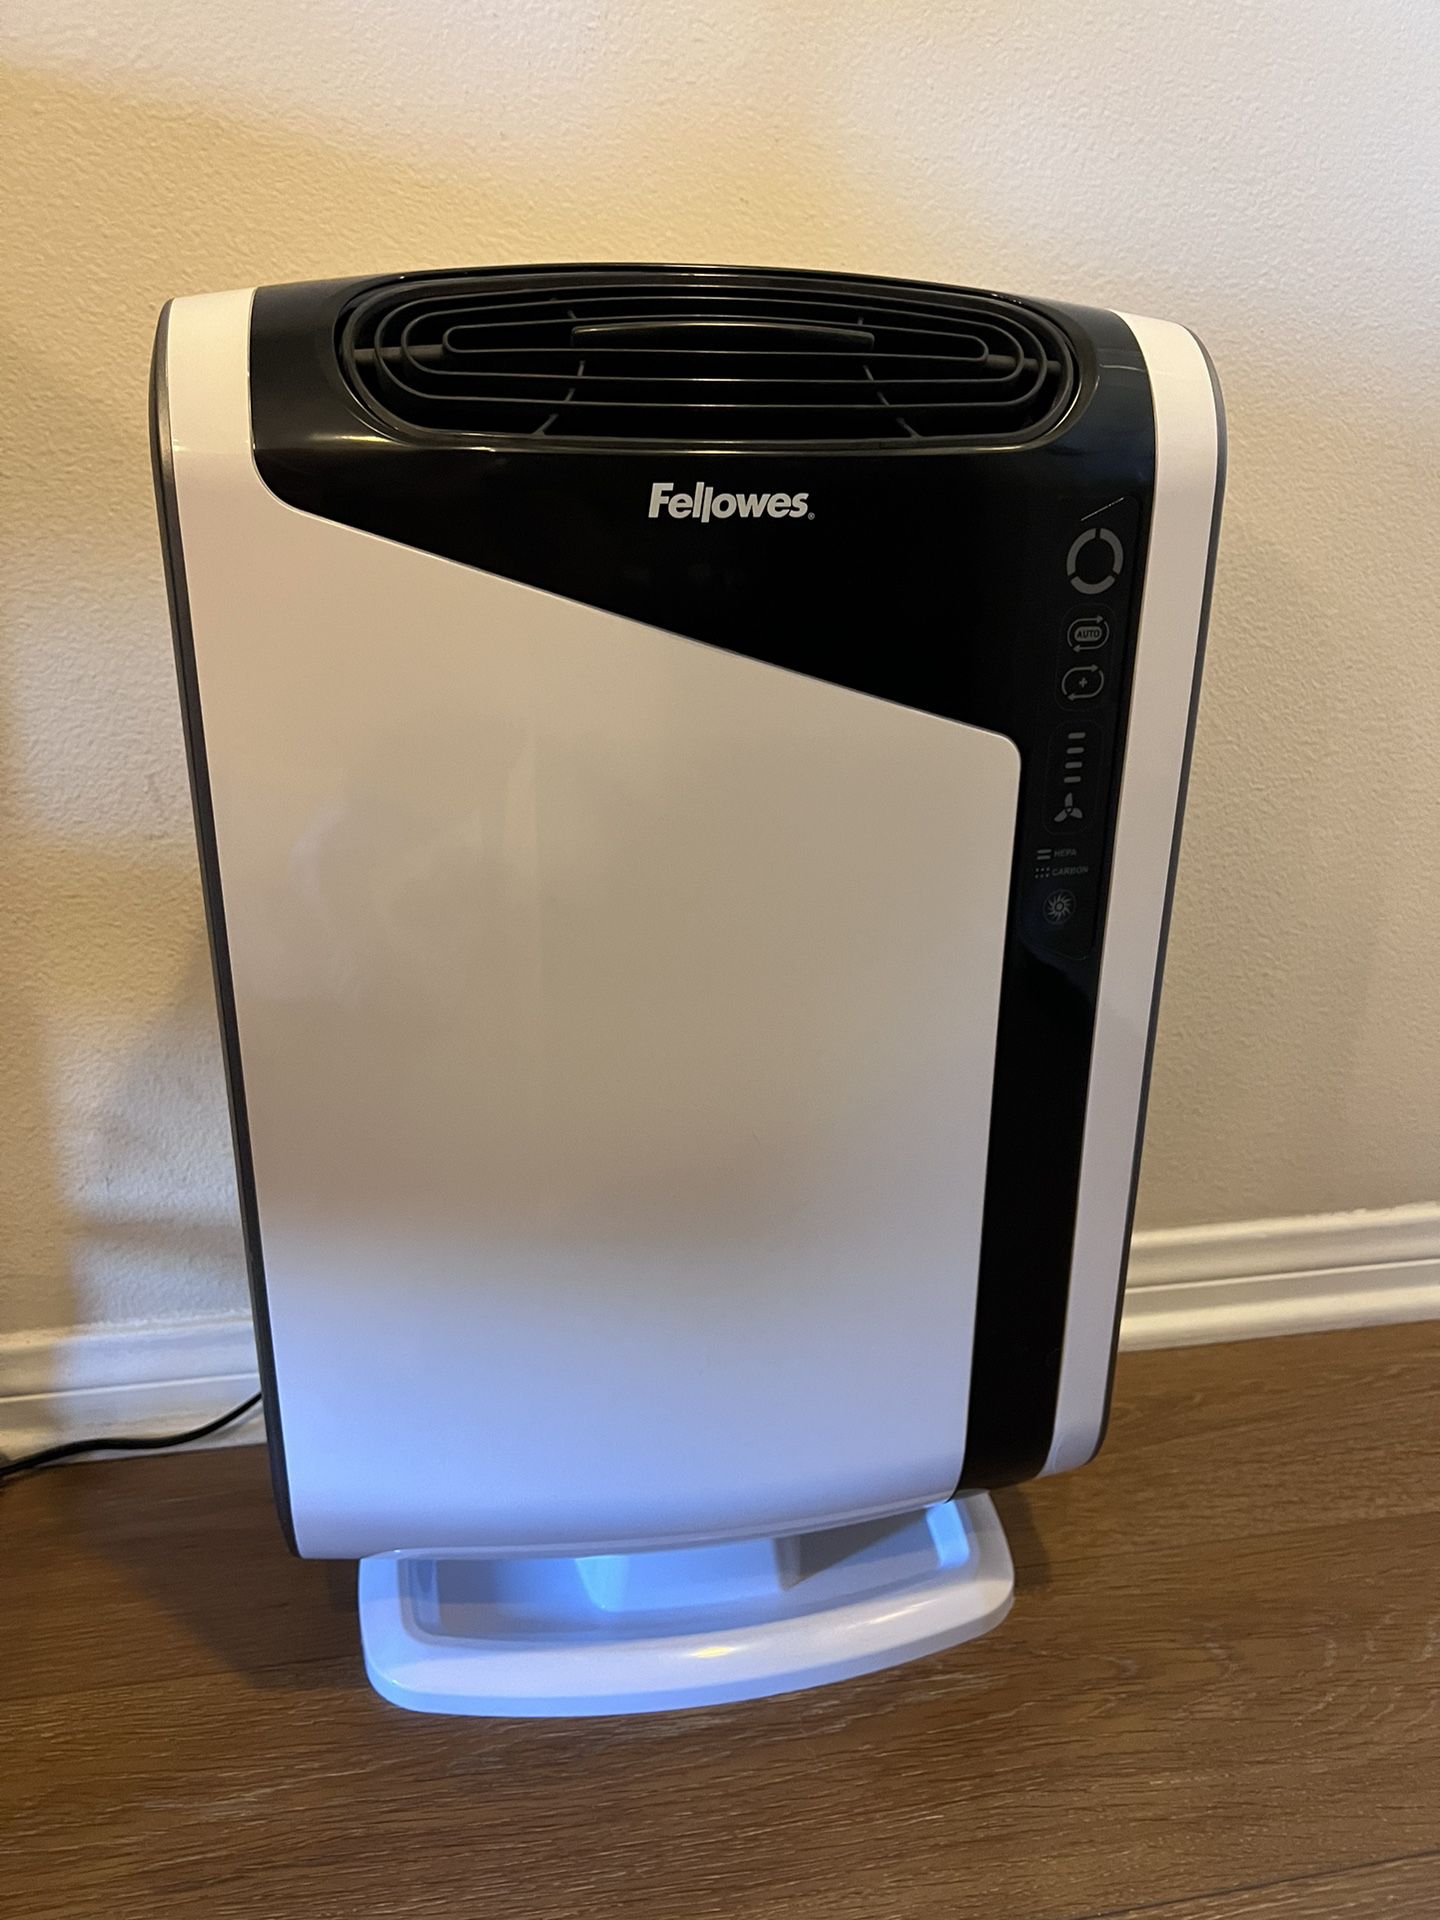 Fellowes AeraMax 300 Large Room Air Purifier Mold, Odors, Dust, Smoke, Allergens and Germs with True HEPA Filter and 4-Stage Purification, White